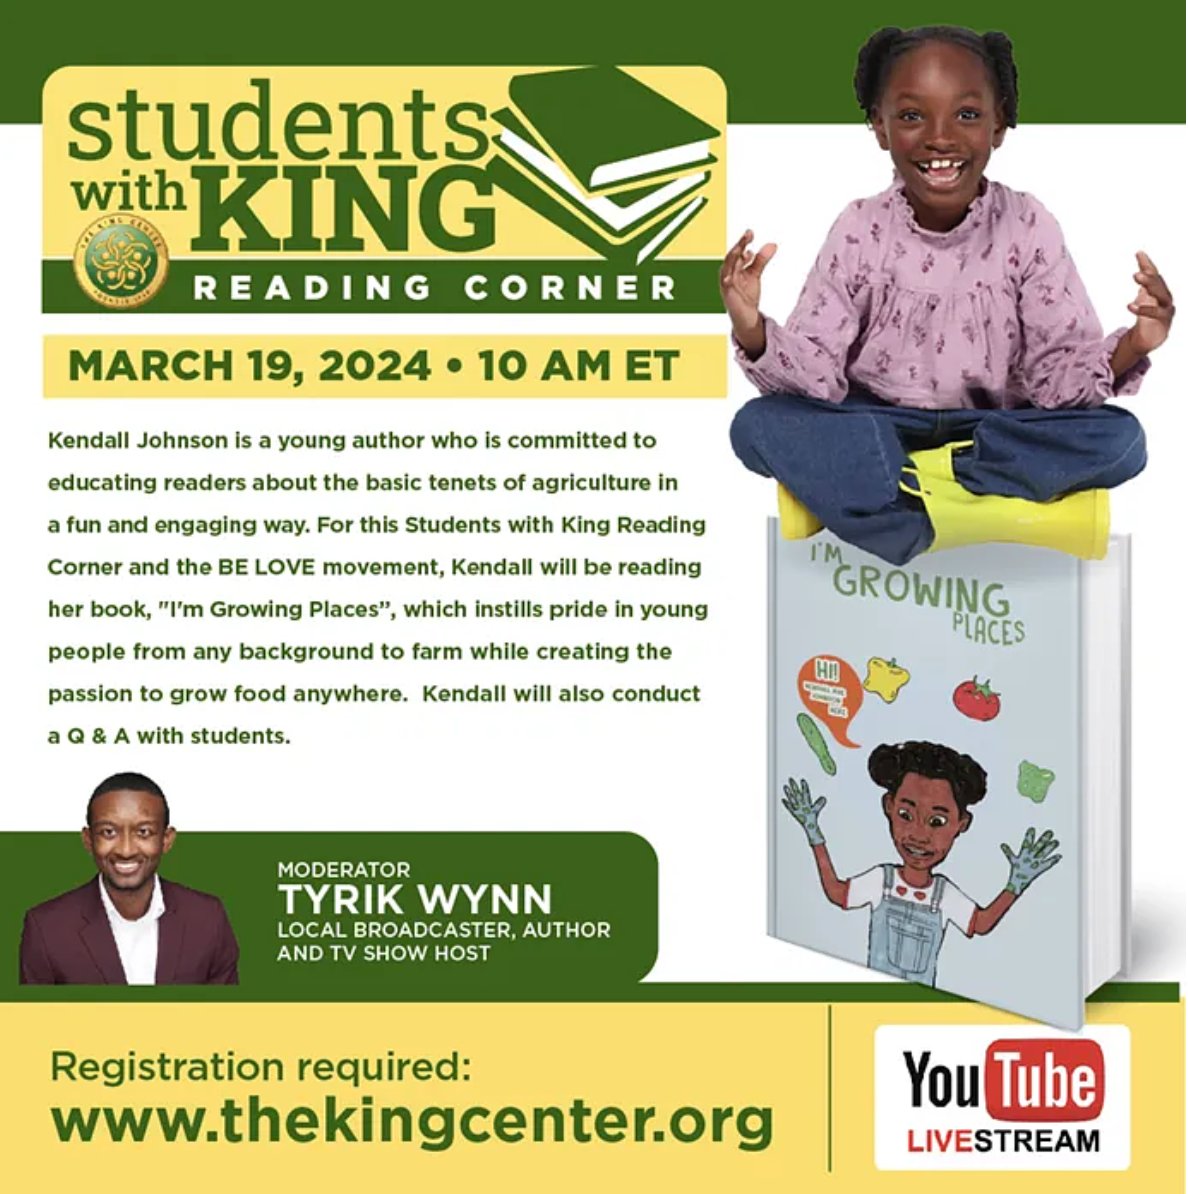 If you haven't already, make sure you register for the #StudentsWithKing Reading Corner. It is happening tomorrow at 10:00 a.m. with moderator Tarik Wynn. Visit our website and register now at thekingcenter.org.